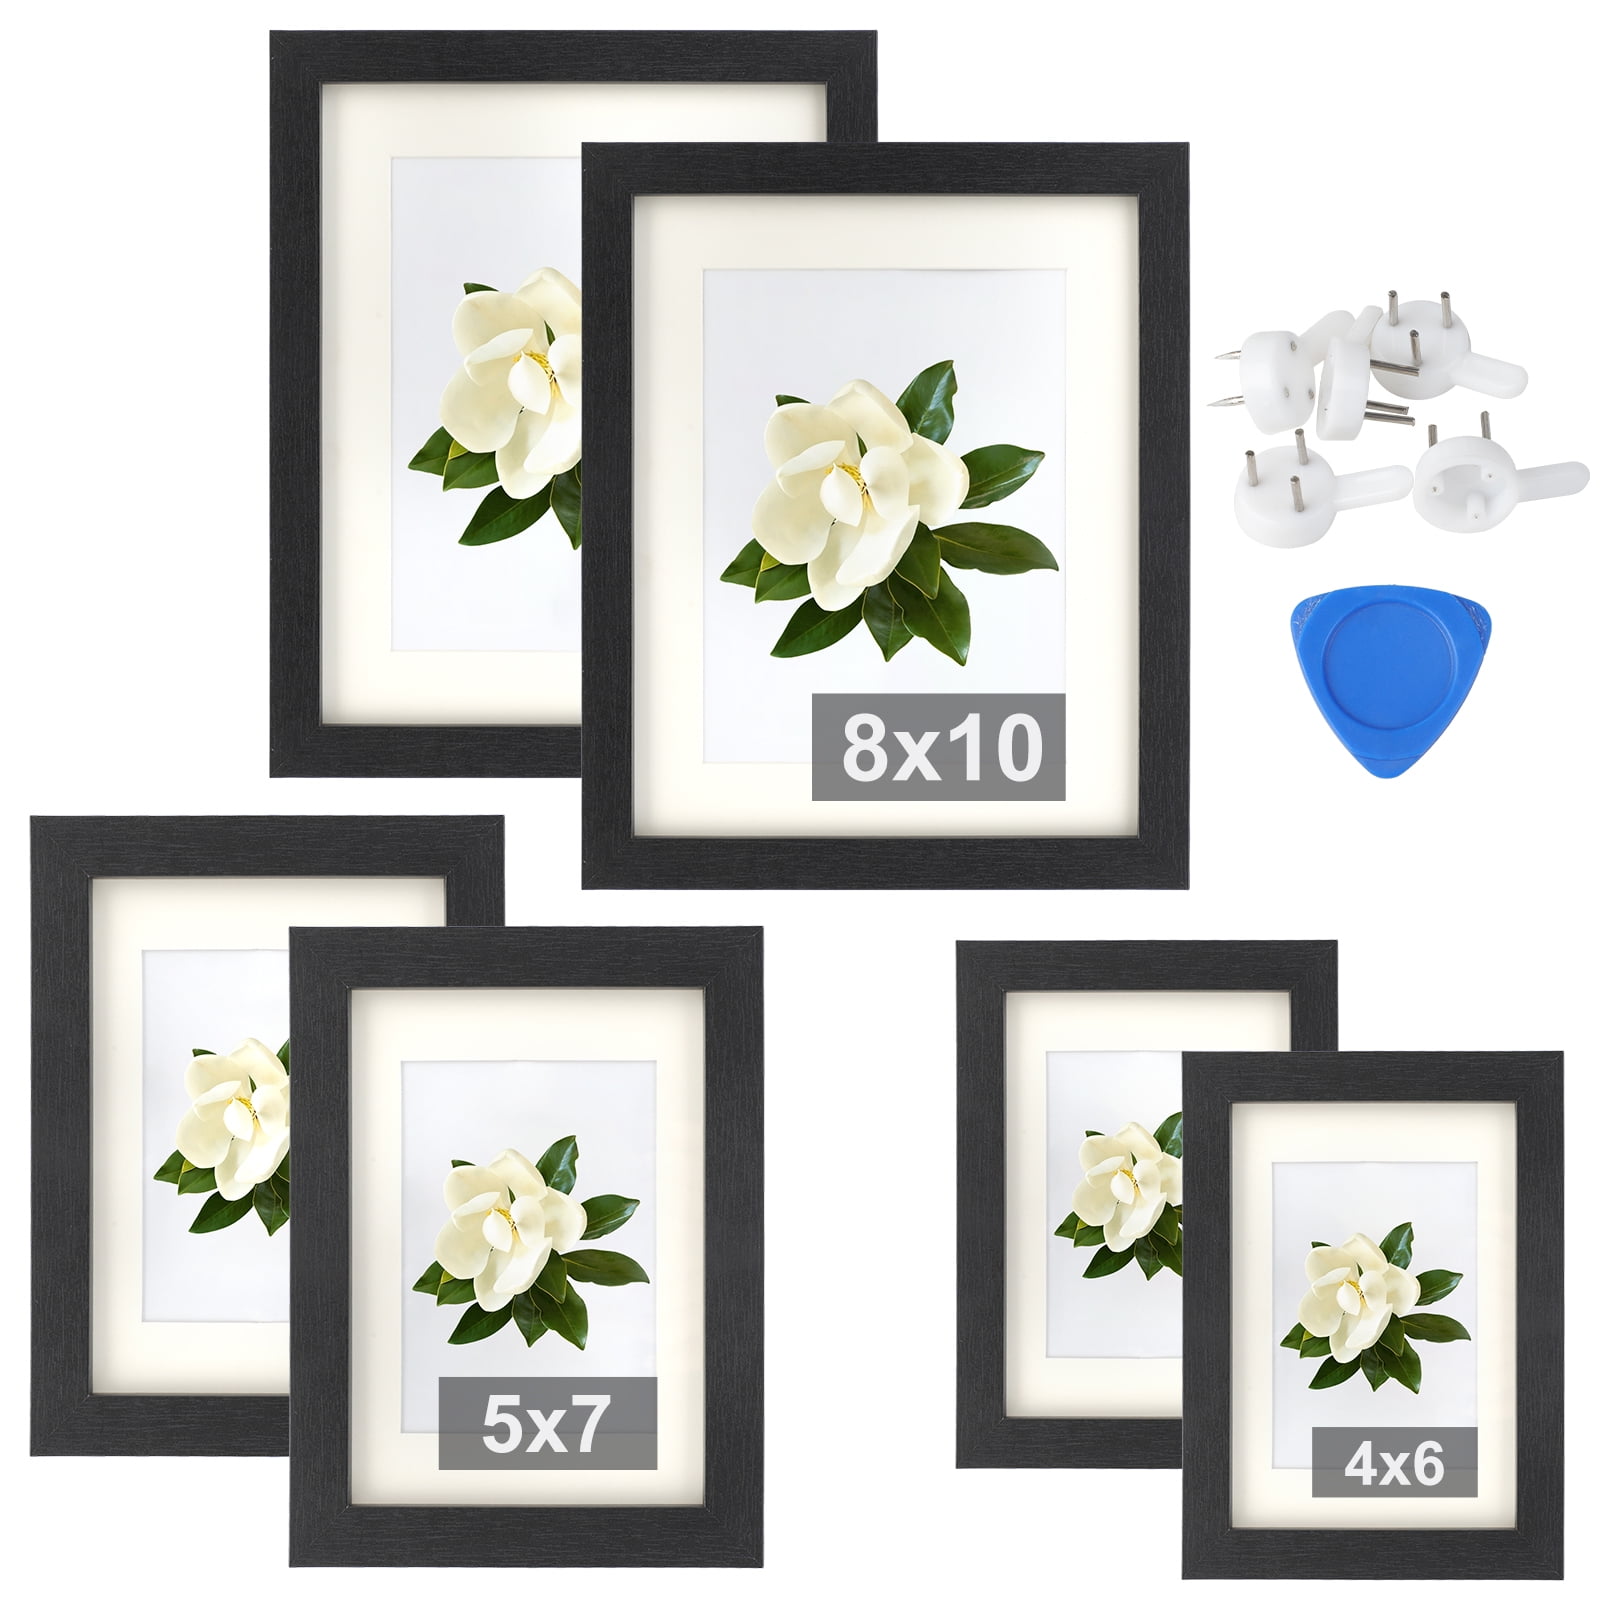 Dual Purpose 8x10 and 5x7 White Wood Picture Frame Details about   BRAND NEW